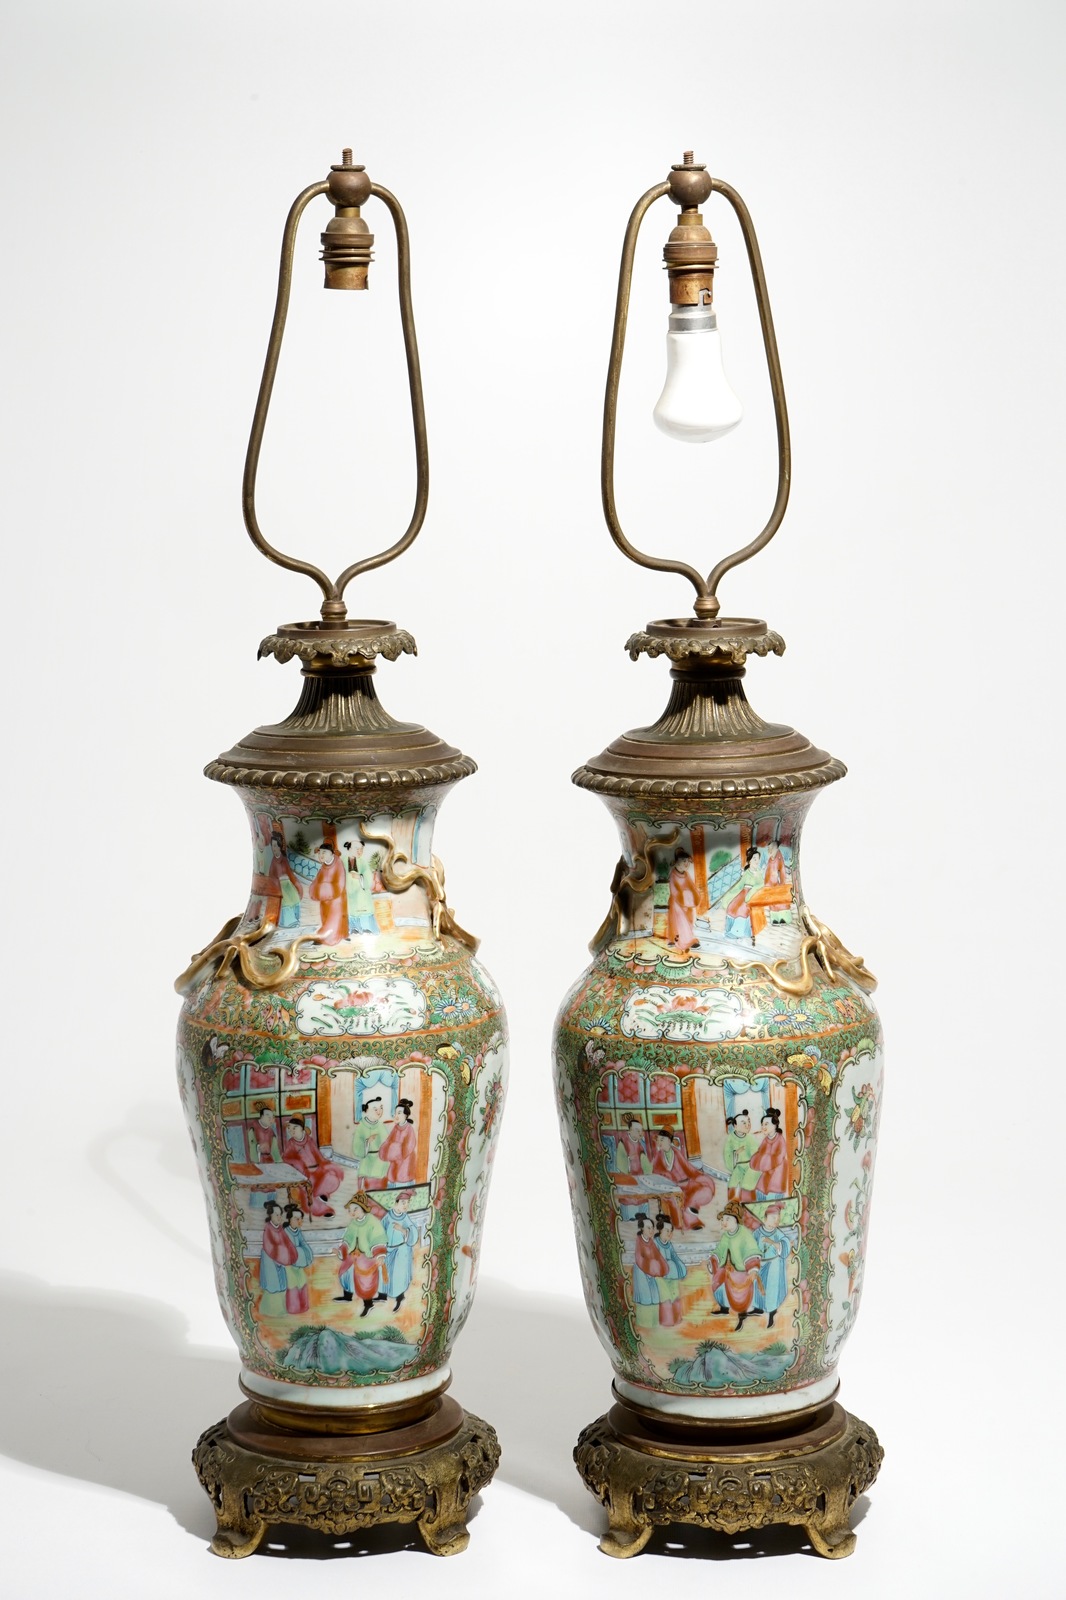 A pair of bronze-mounted Chinese Canton famille rose vases, transformed into lamps, 19th C. - Image 3 of 6